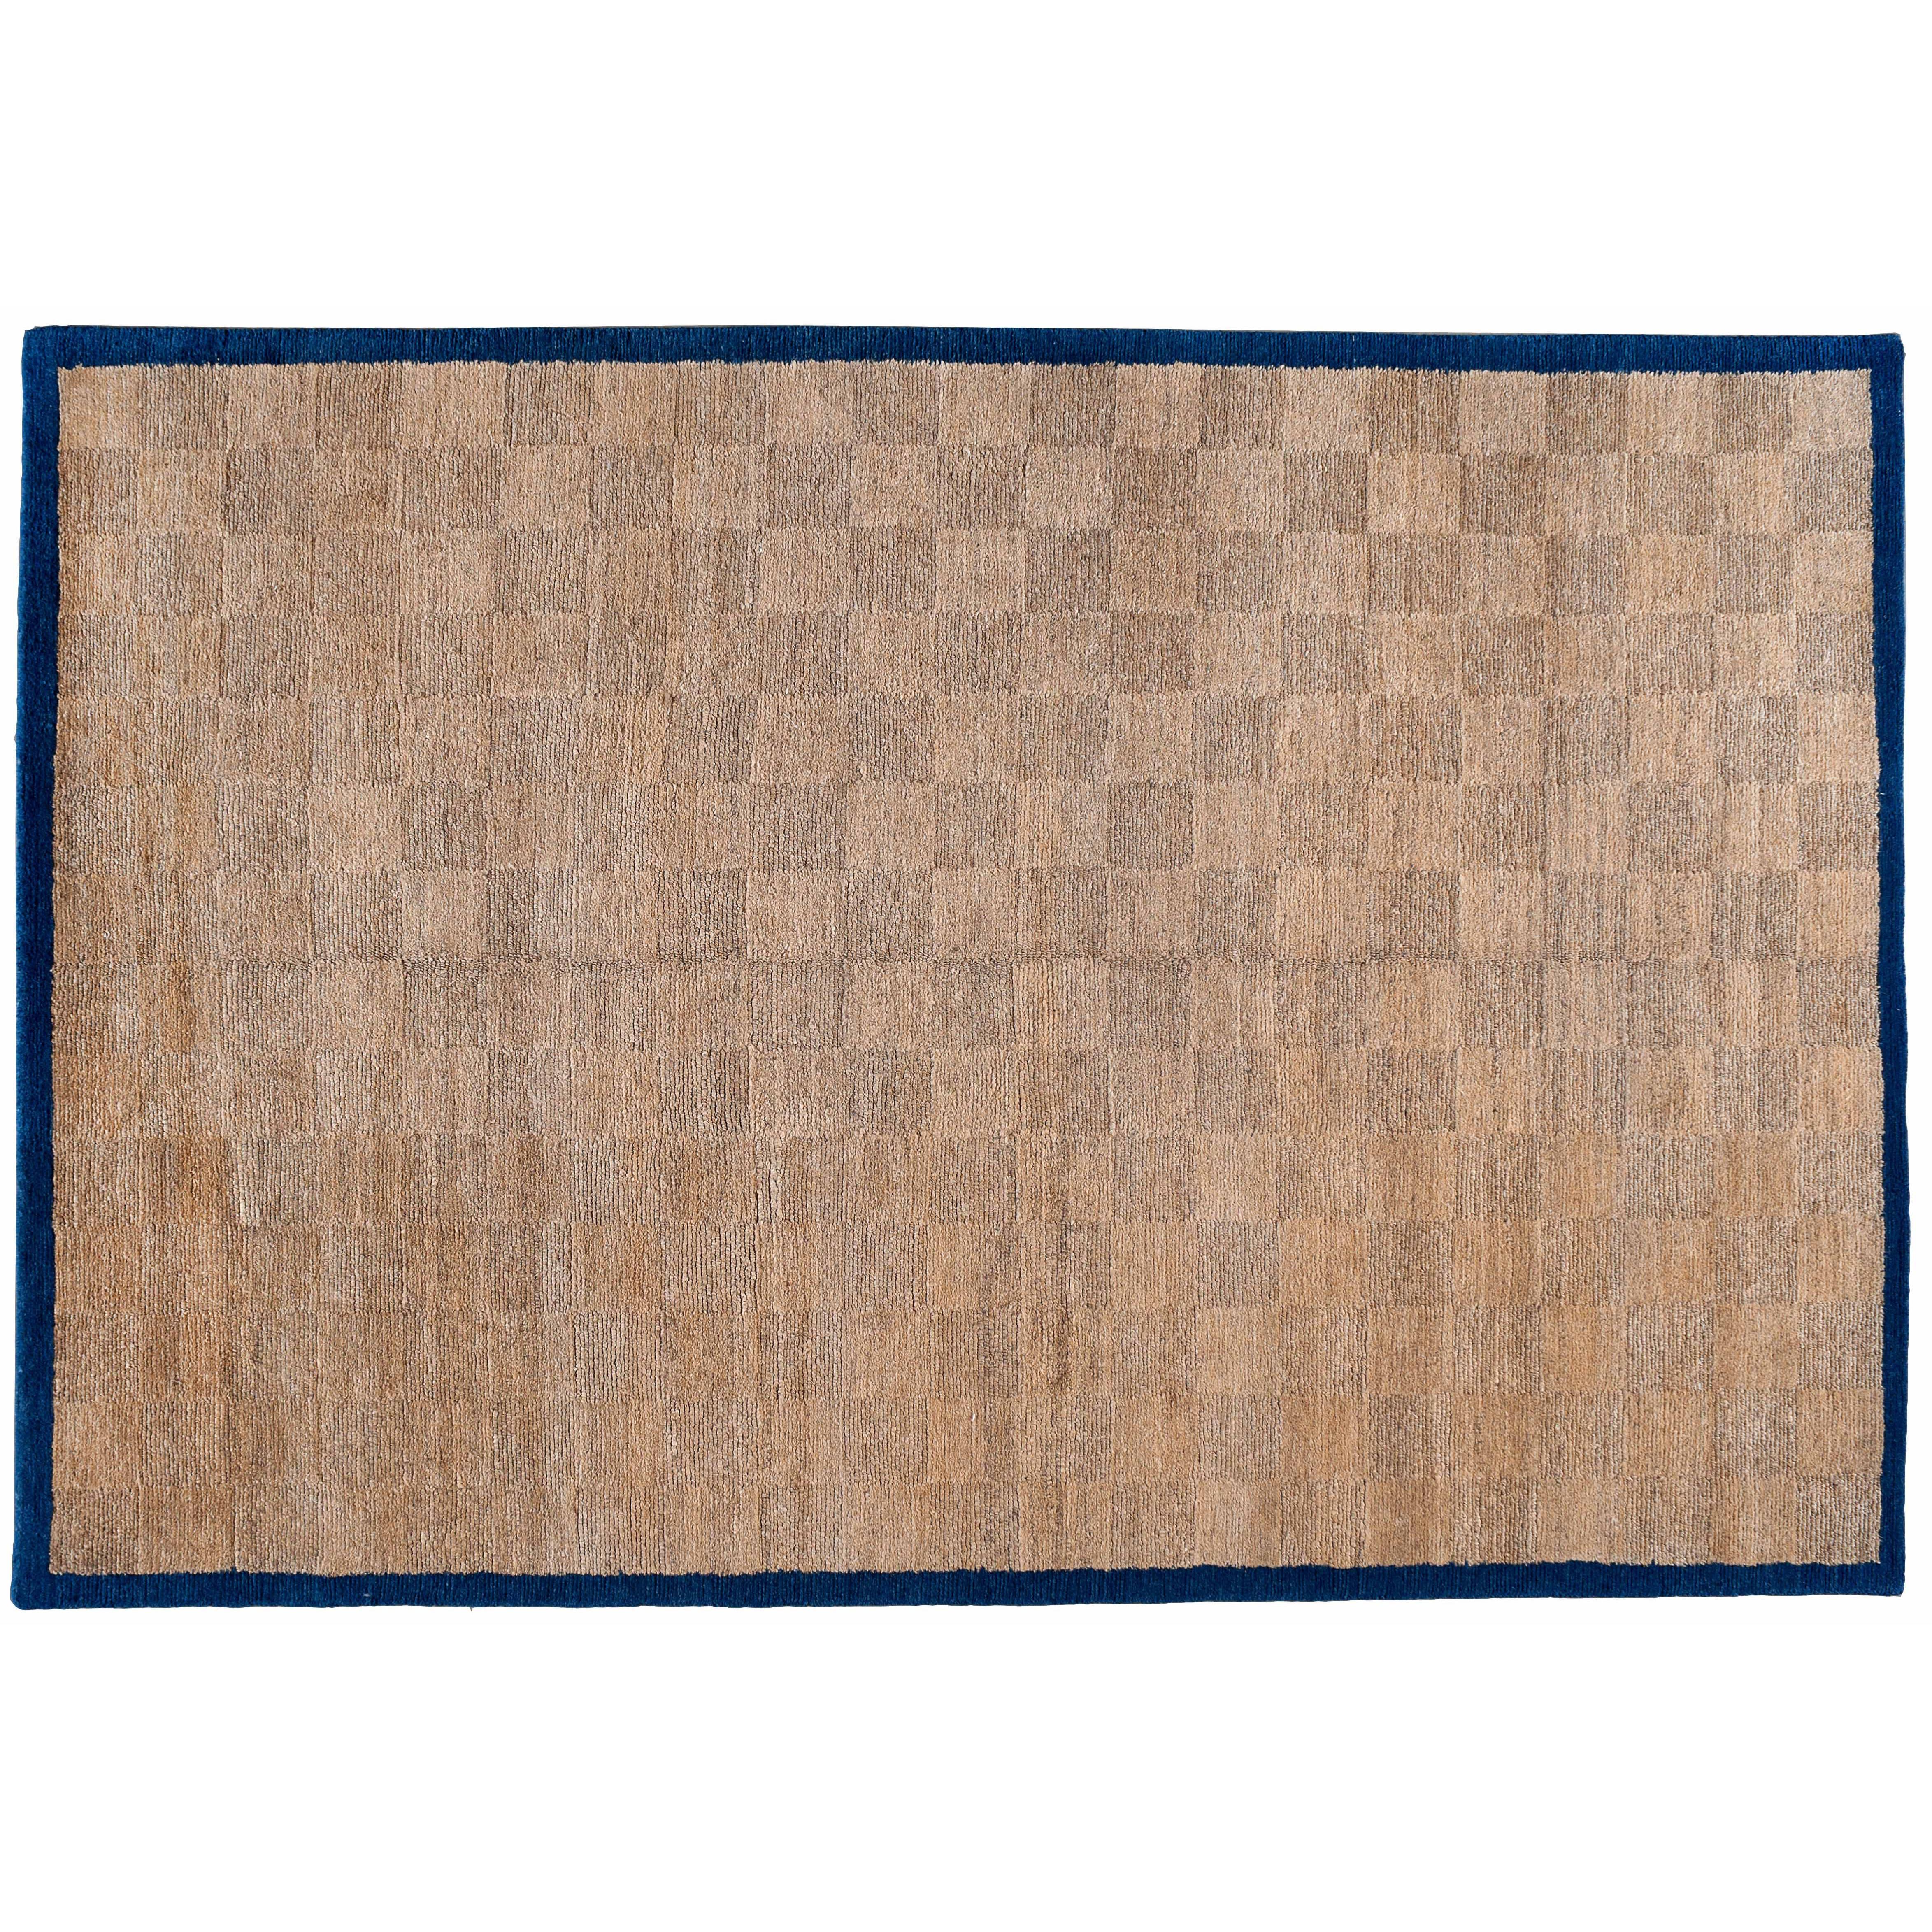 Tone on Tone Checkered Rug with Navy Border